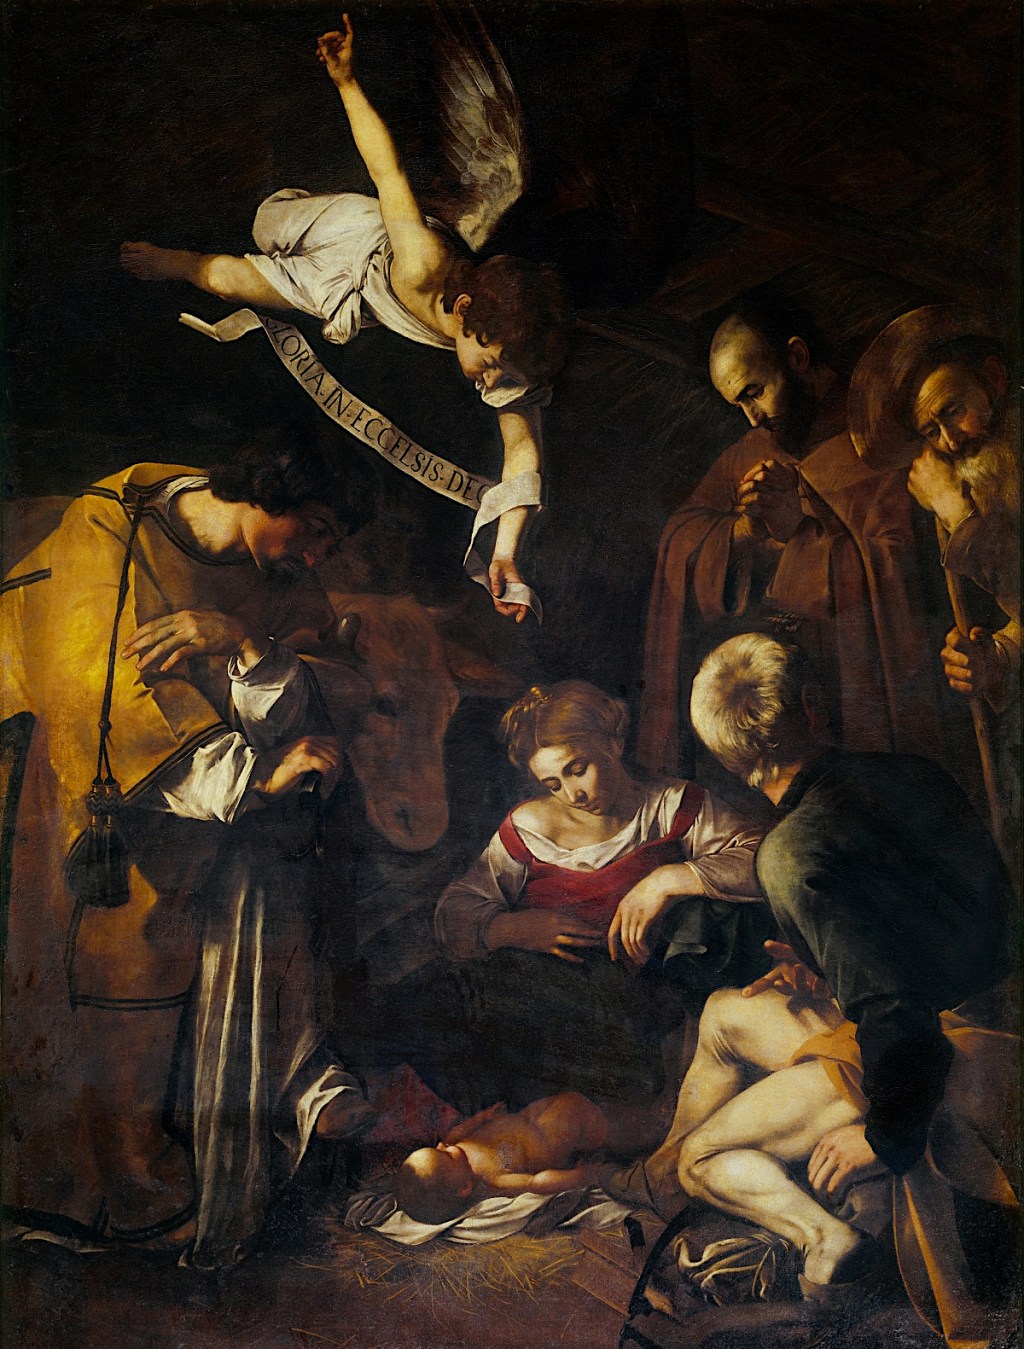 "Nativity with St. Francis and St. Lawrence" by Caravaggio, 1609